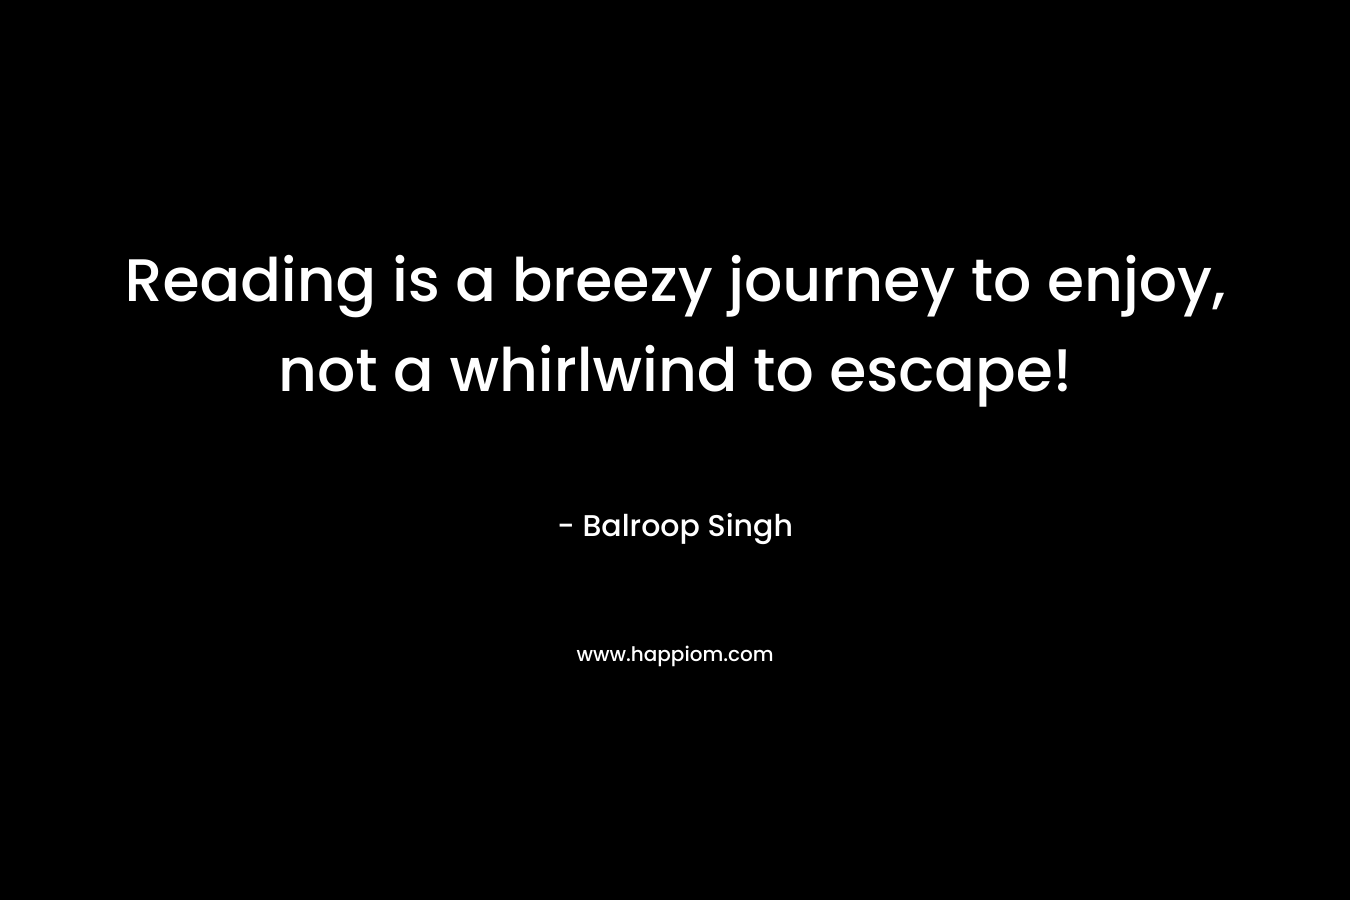 Reading is a breezy journey to enjoy, not a whirlwind to escape!